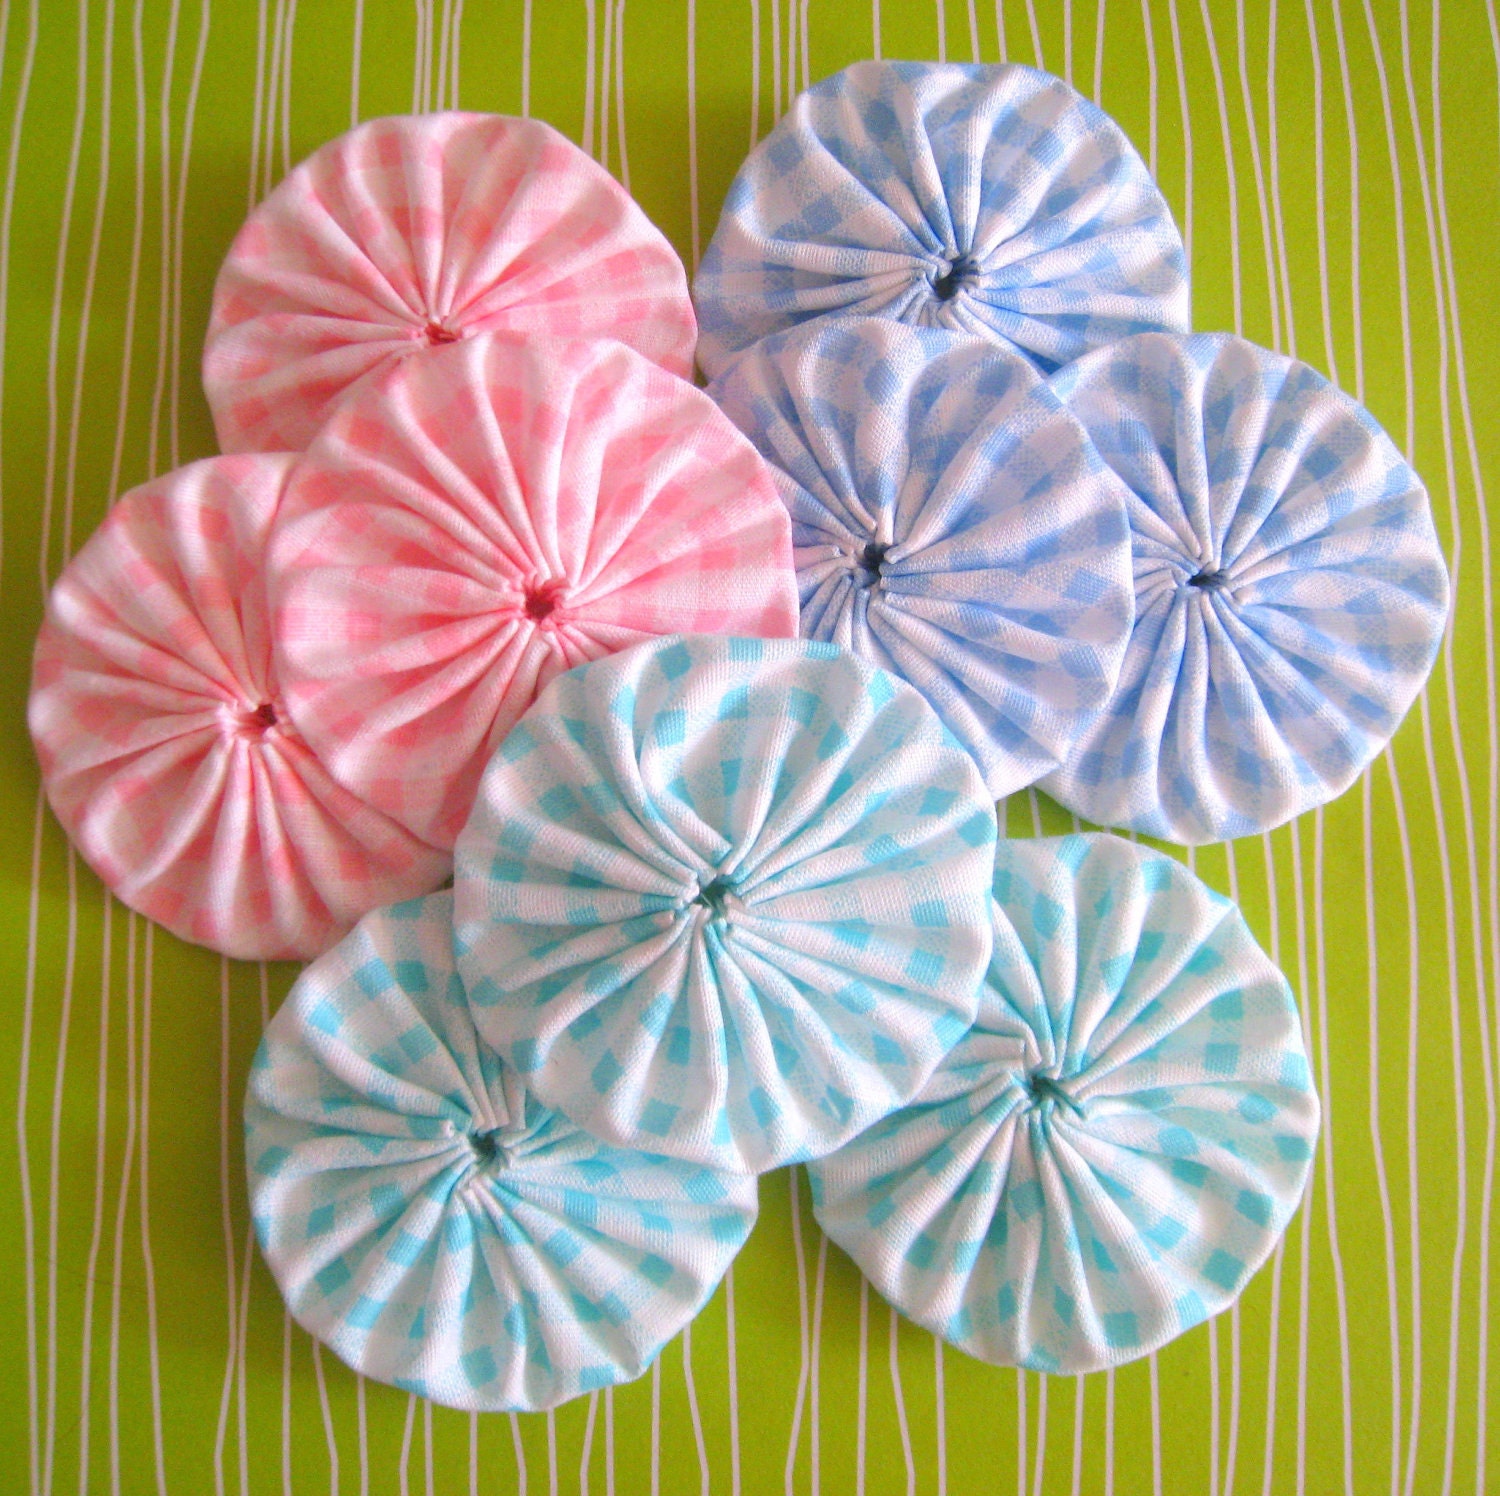 Lot of 9 , 2 inches Aqua Blue, Mint Green,  Baby Pink and White Gingham Cotton YoYo Appliques